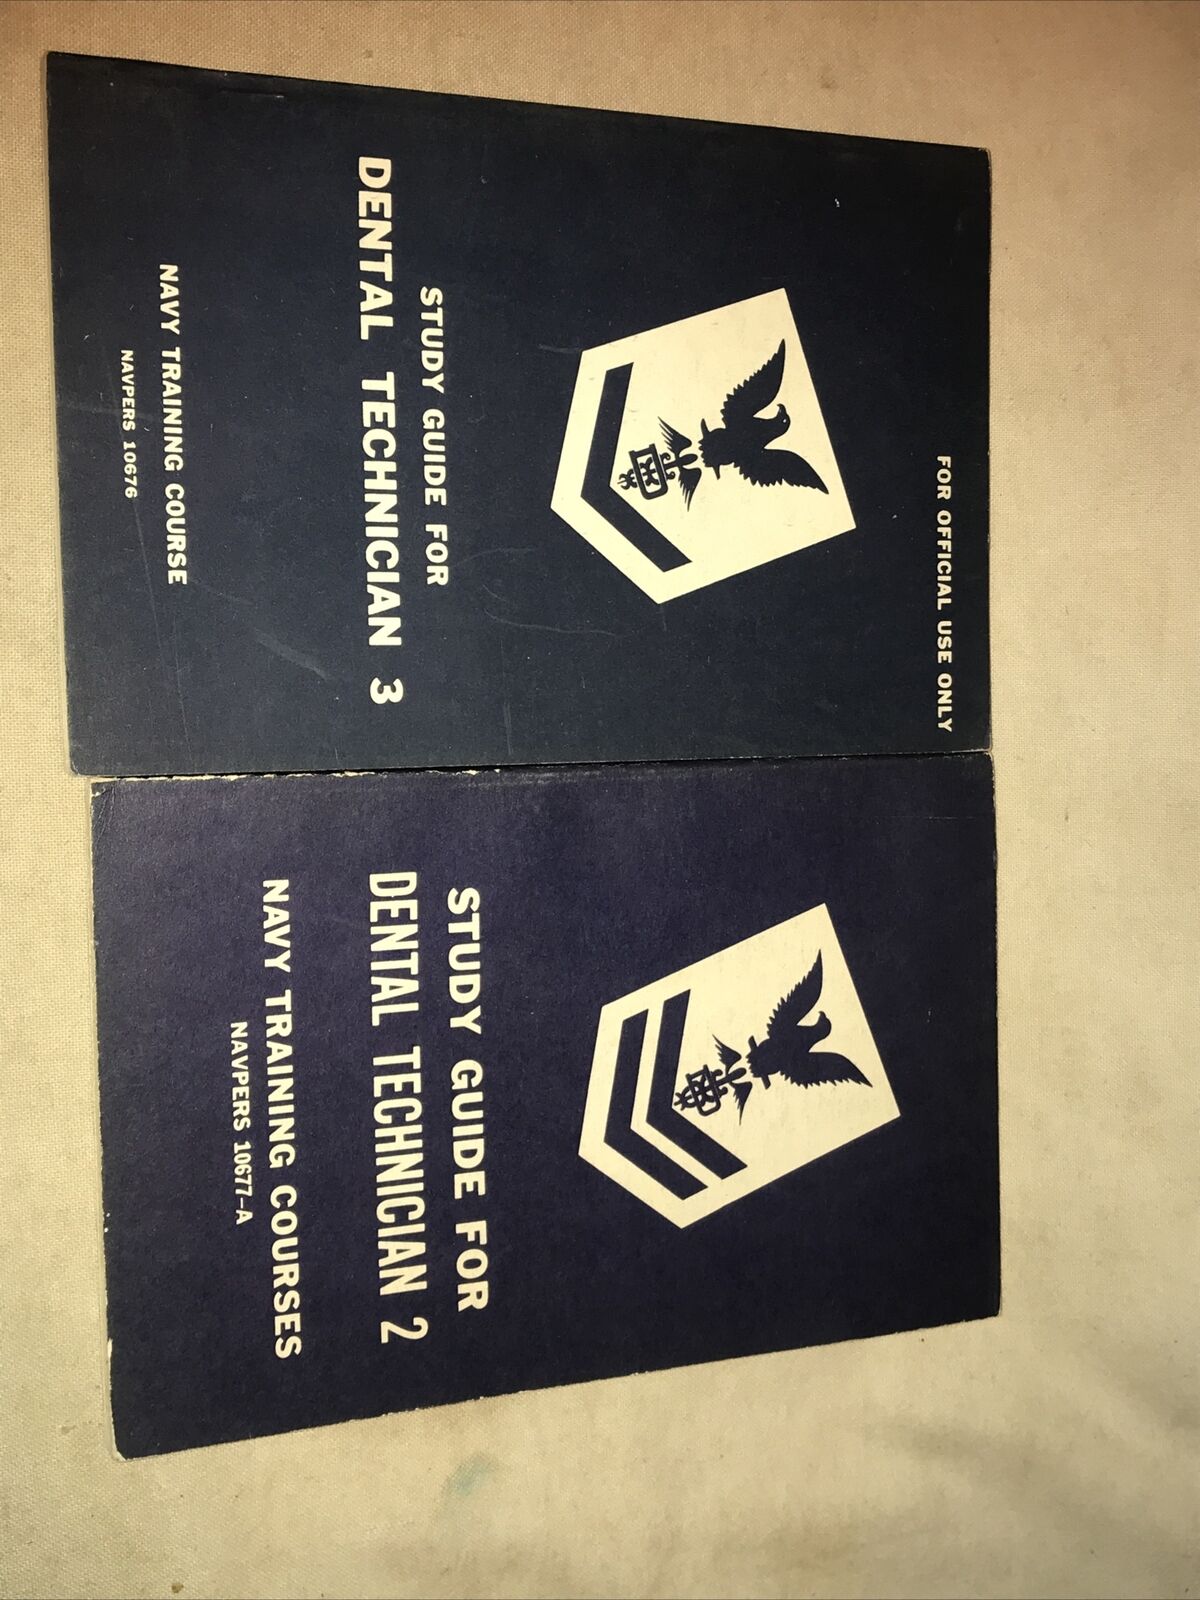 NAVPERS DENTAL TECHNICIAN STUDY GUIDE 2 & 3 MILITARIA BOOK NAVY TRAINING 1949 50